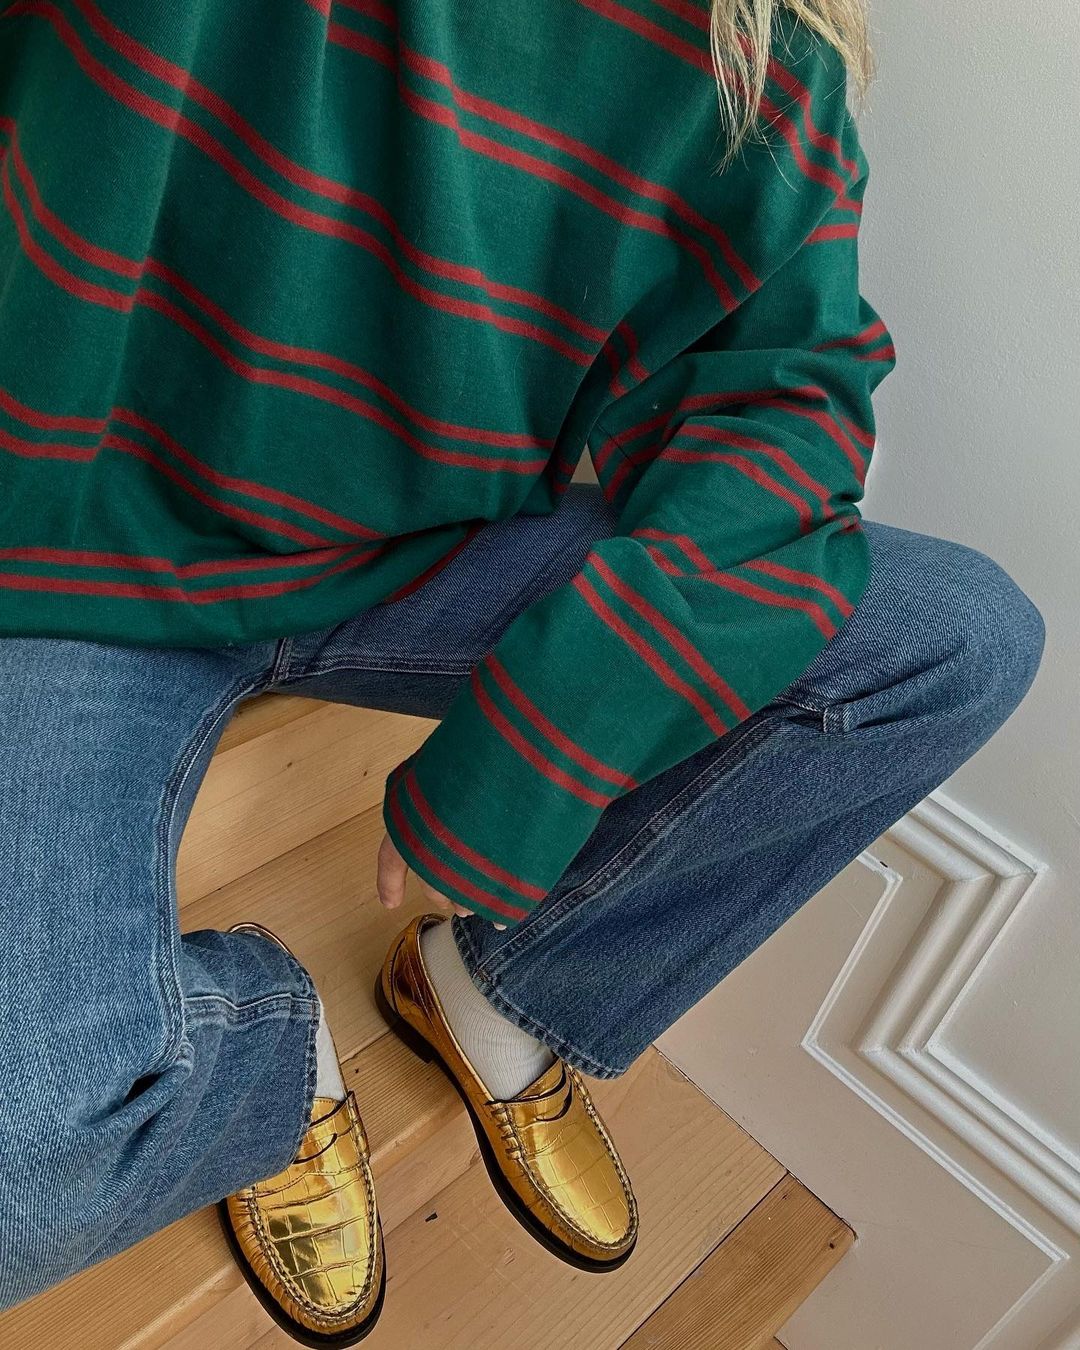 Lucy Williams wearing jeans and gold loafers